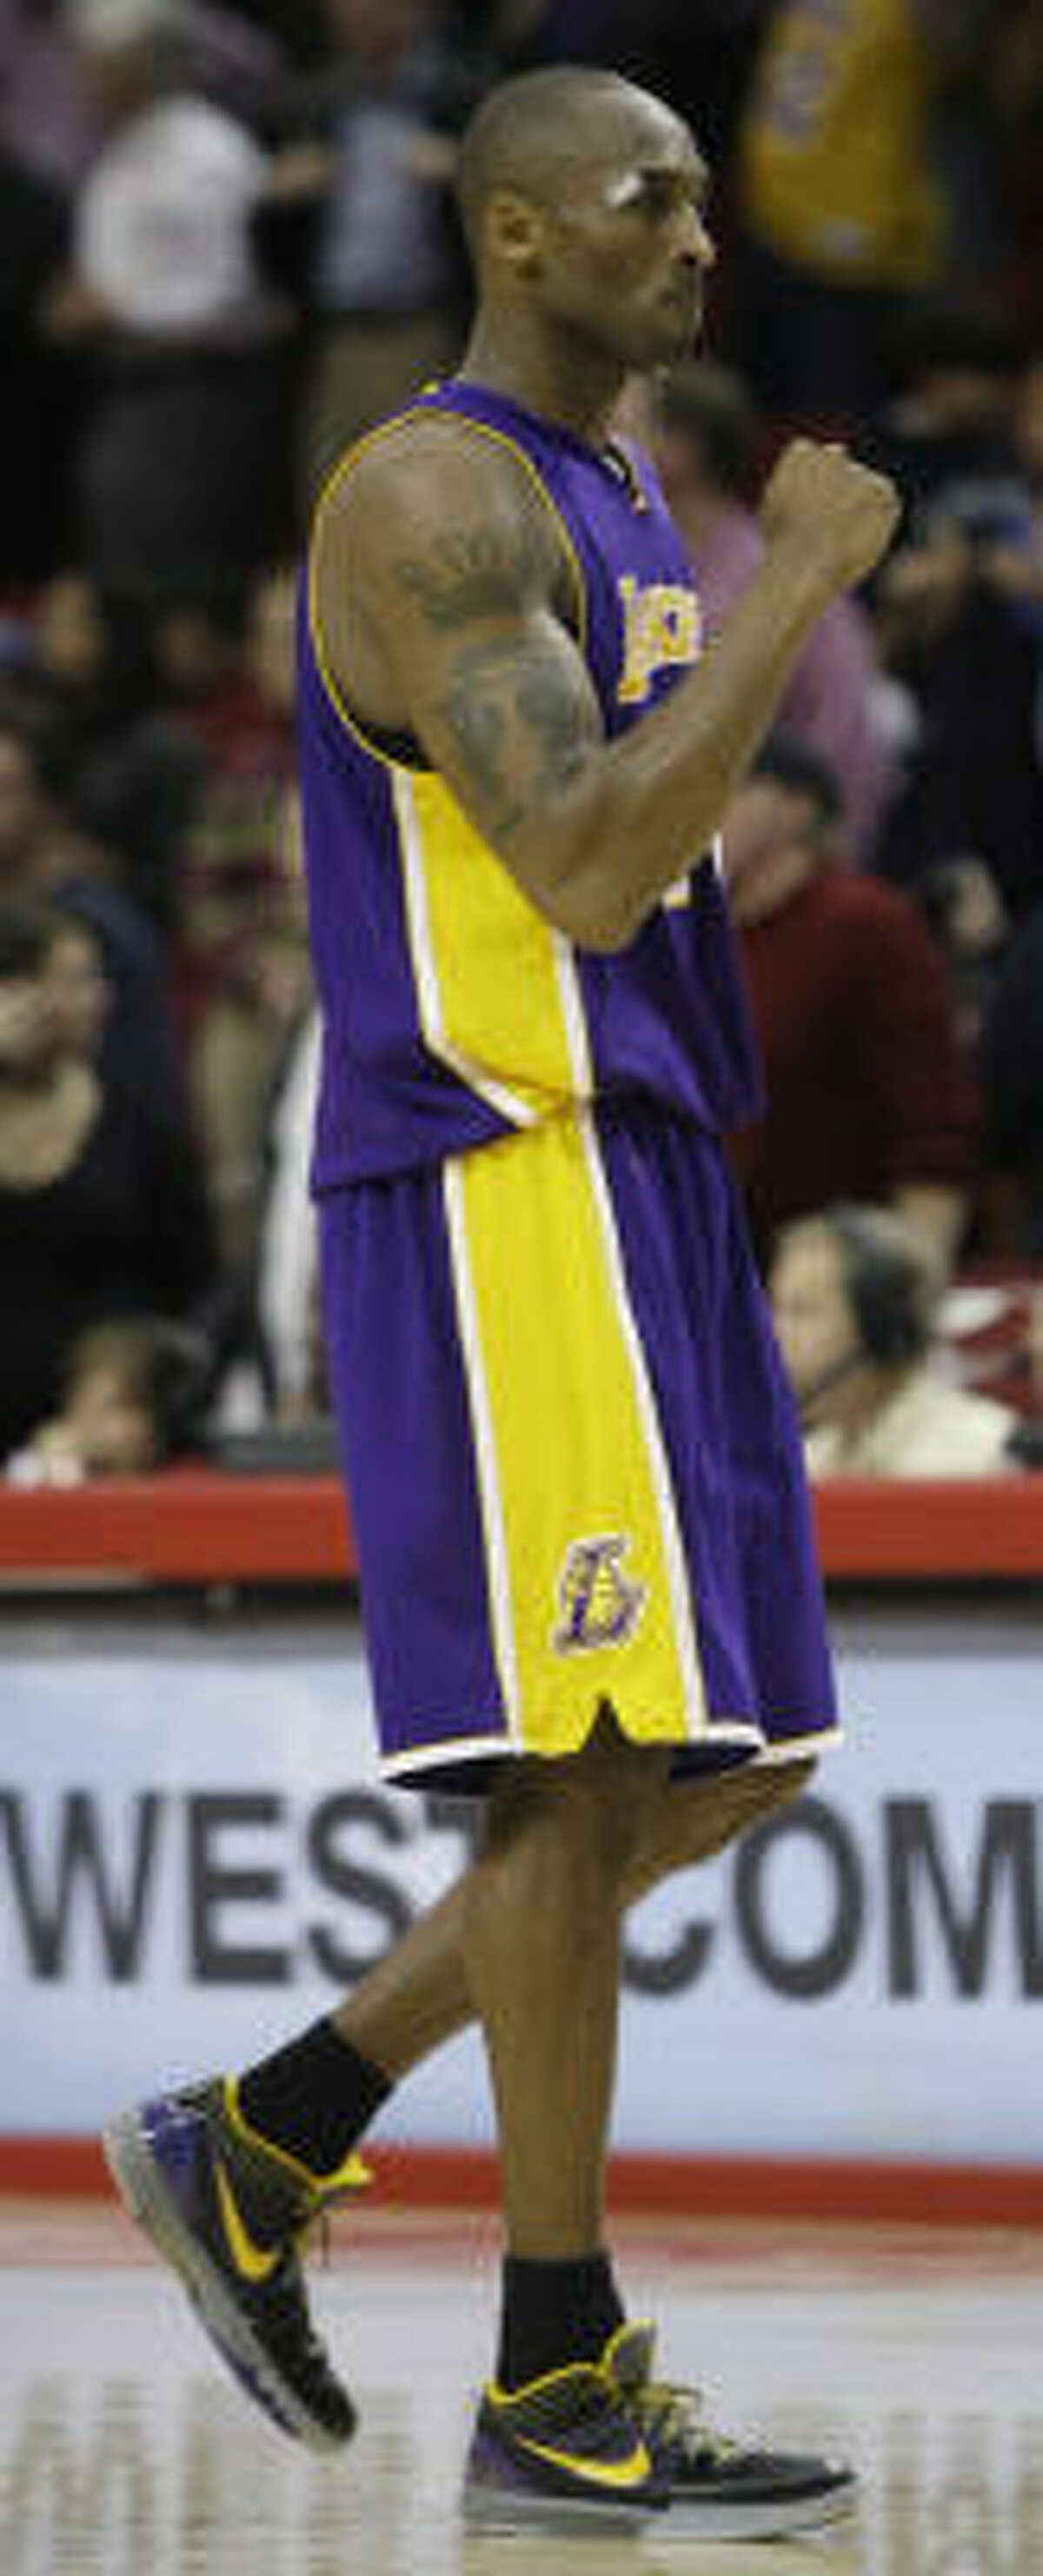 Lakers guard Kobe Bryant pumps his fist after the Lakers took a late lead in the fourth quarter. Bryant hit a clutch three-point shot to give the Lakers a 102-100 advantage with 27.4 seconds left.